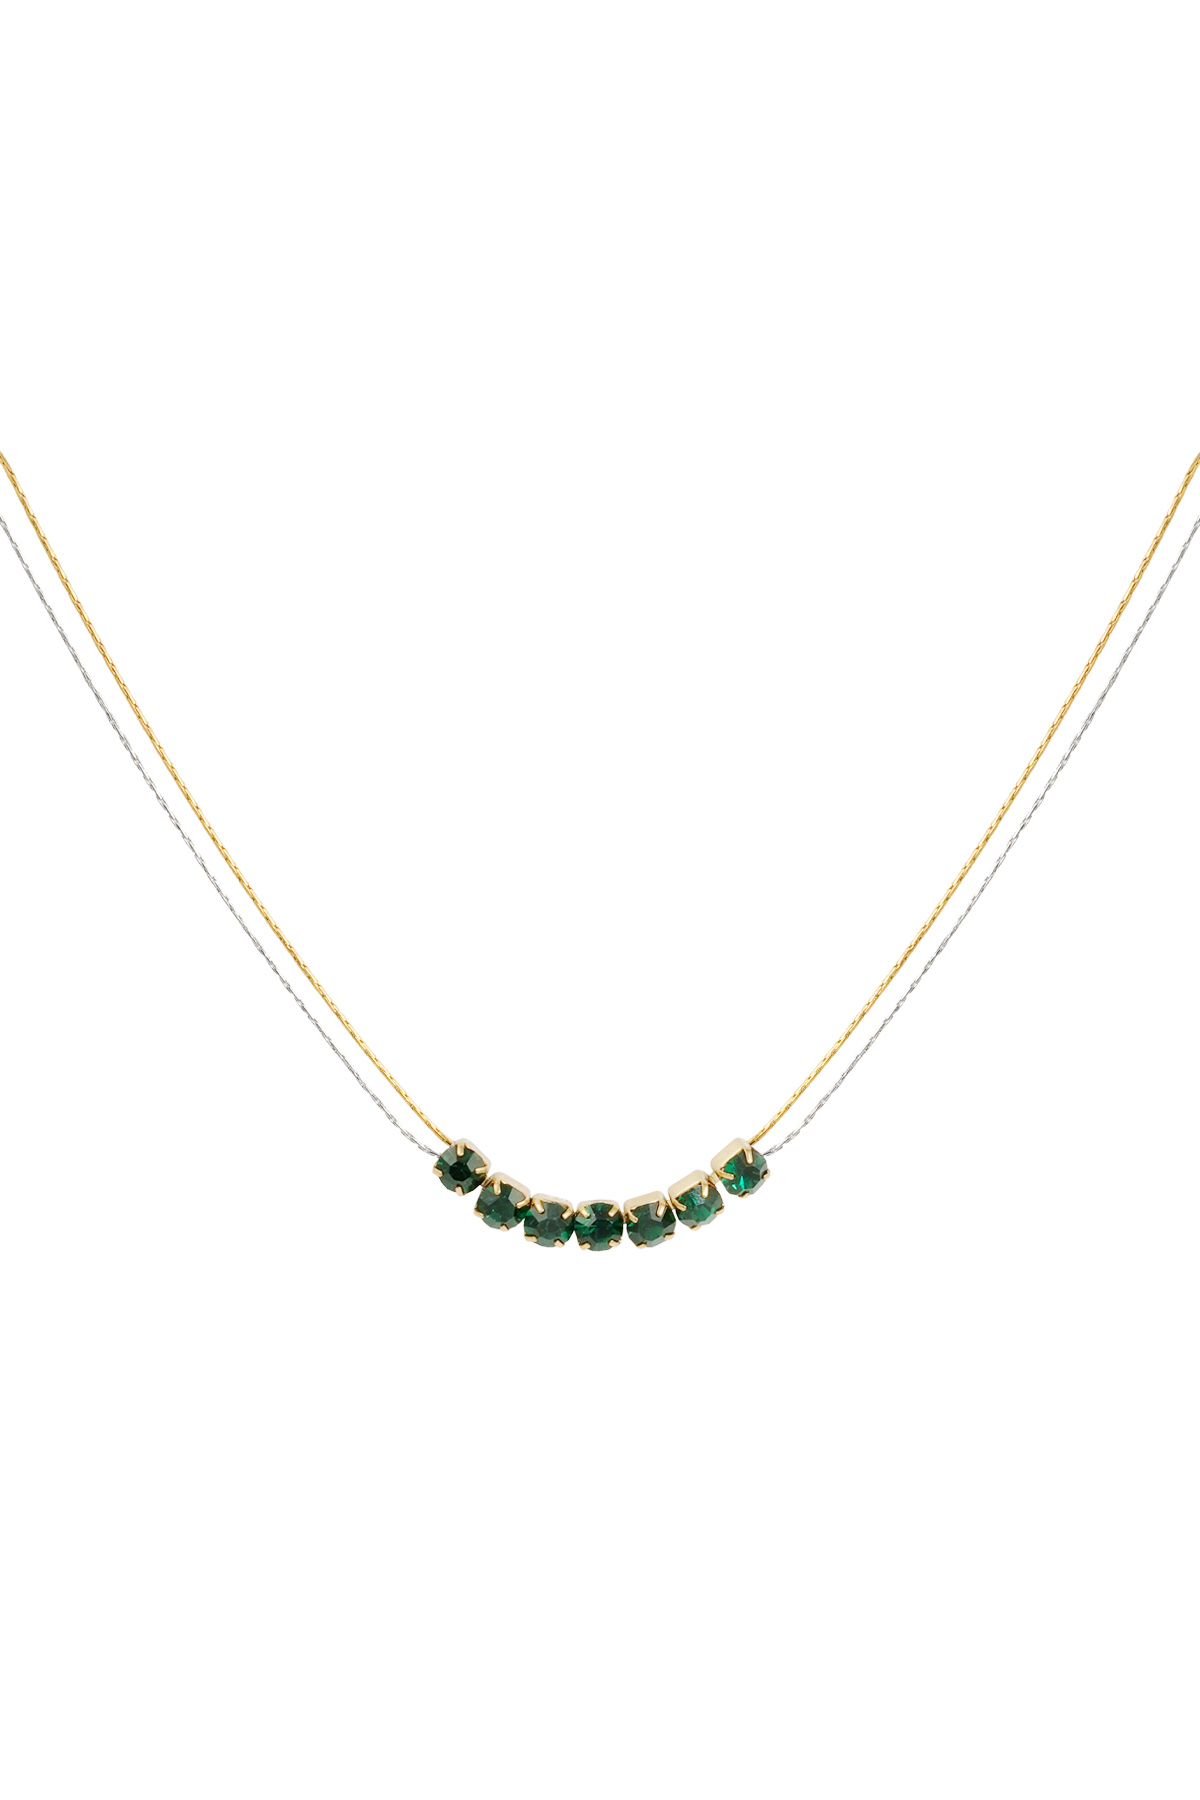 Necklace gold/silver with stone - green